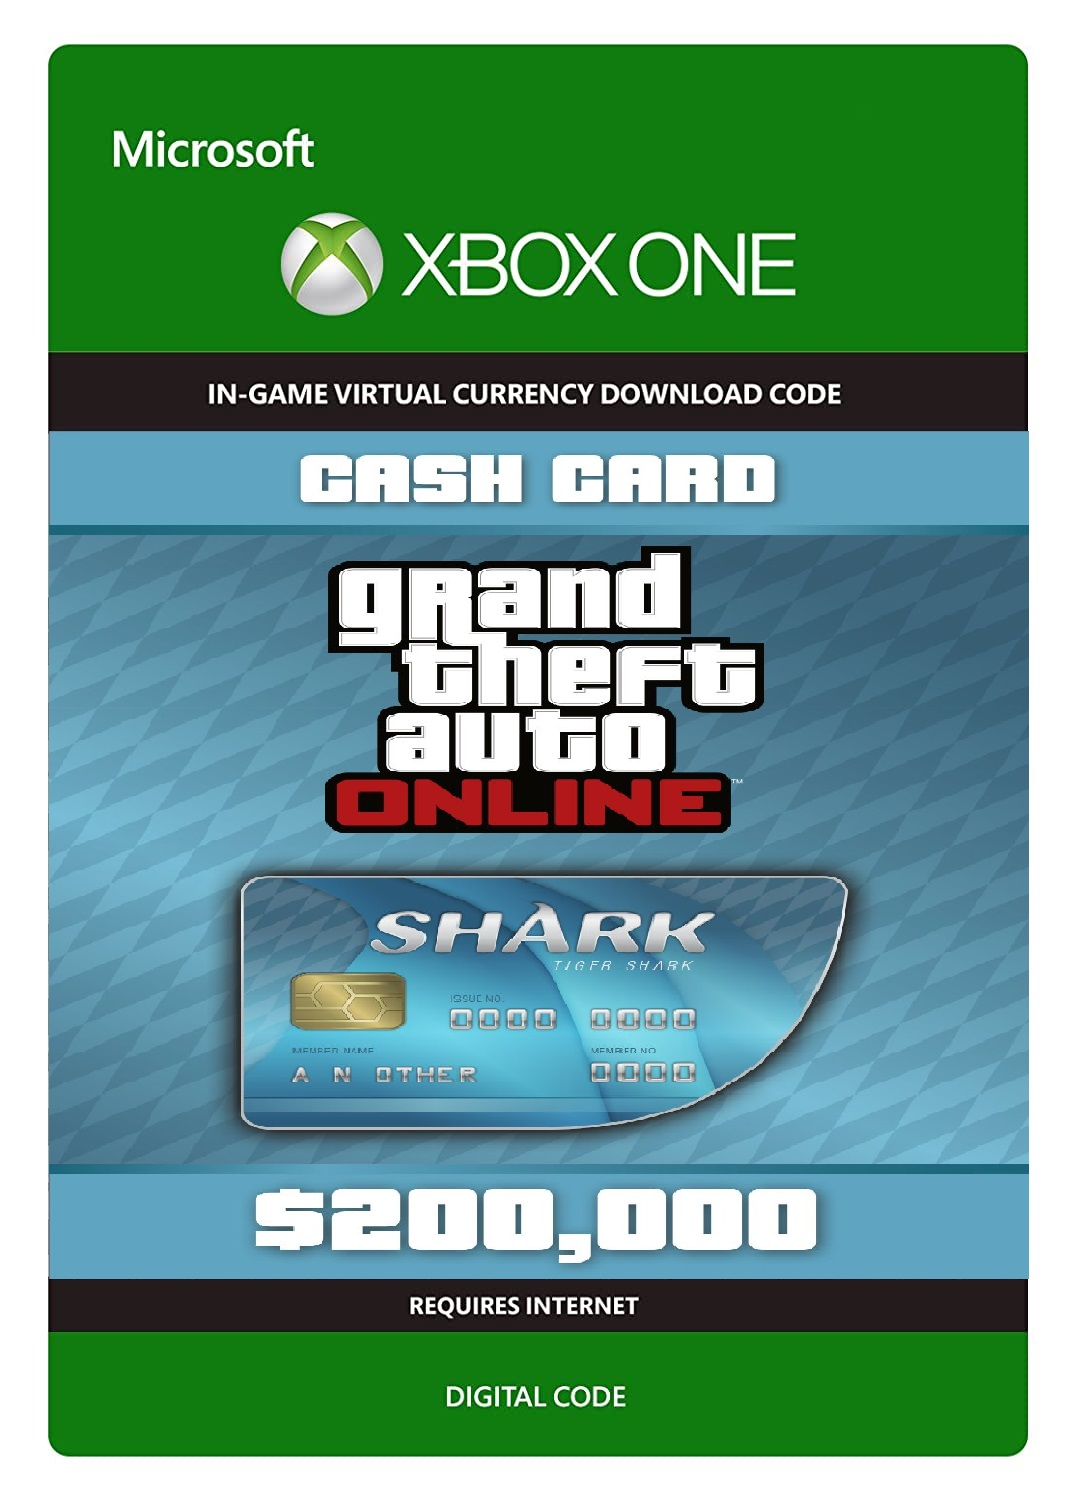 Grand Theft Auto V : Tiger Shark Cash Card $200,000 In-Game